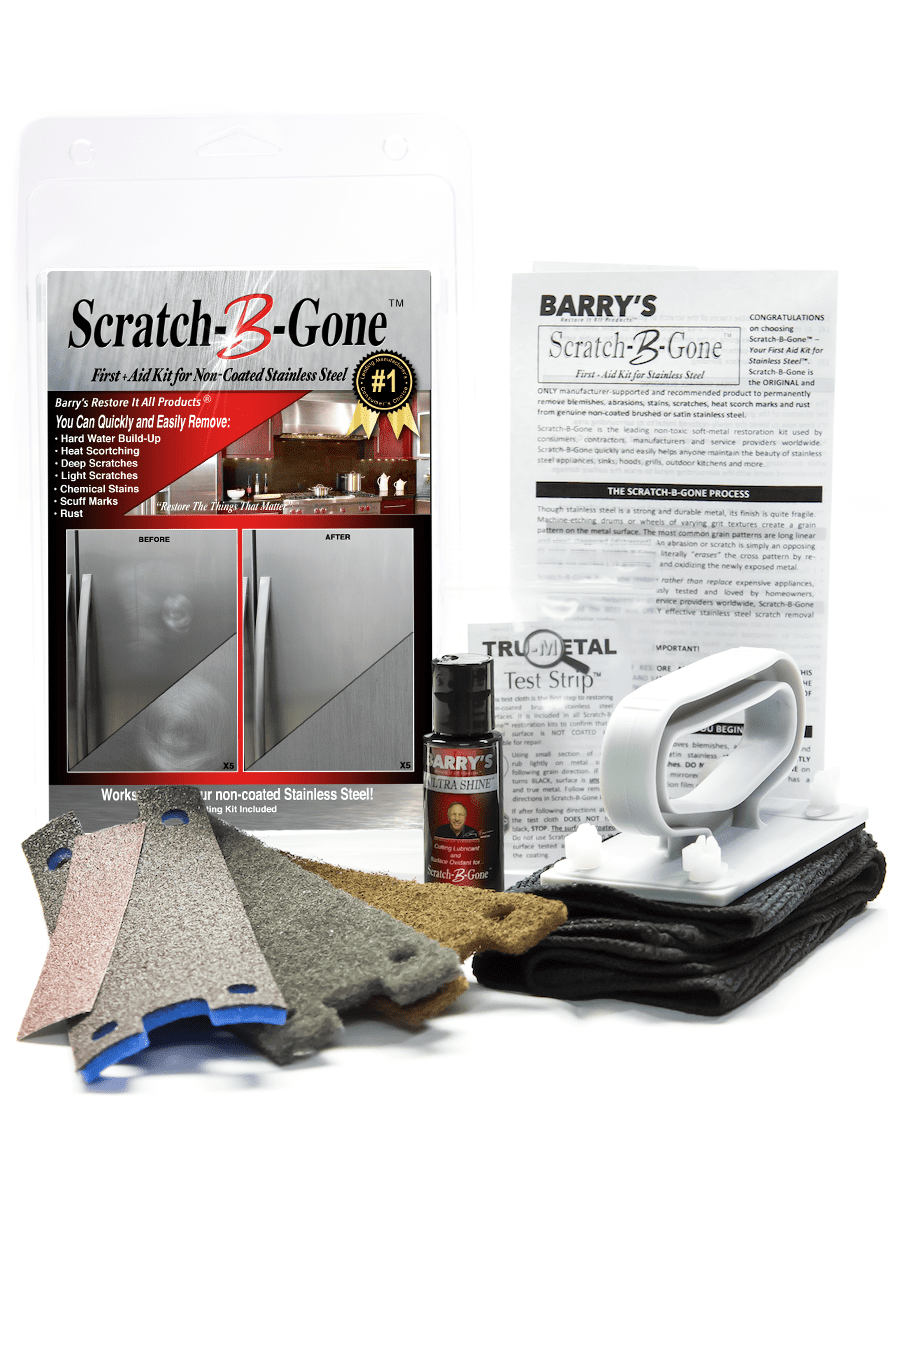 Scratch-B-Gone Homeowner Kit | The #1 selling kit used to remove scratches,  rust, discoloration and more from non-coated Stainless Steel!